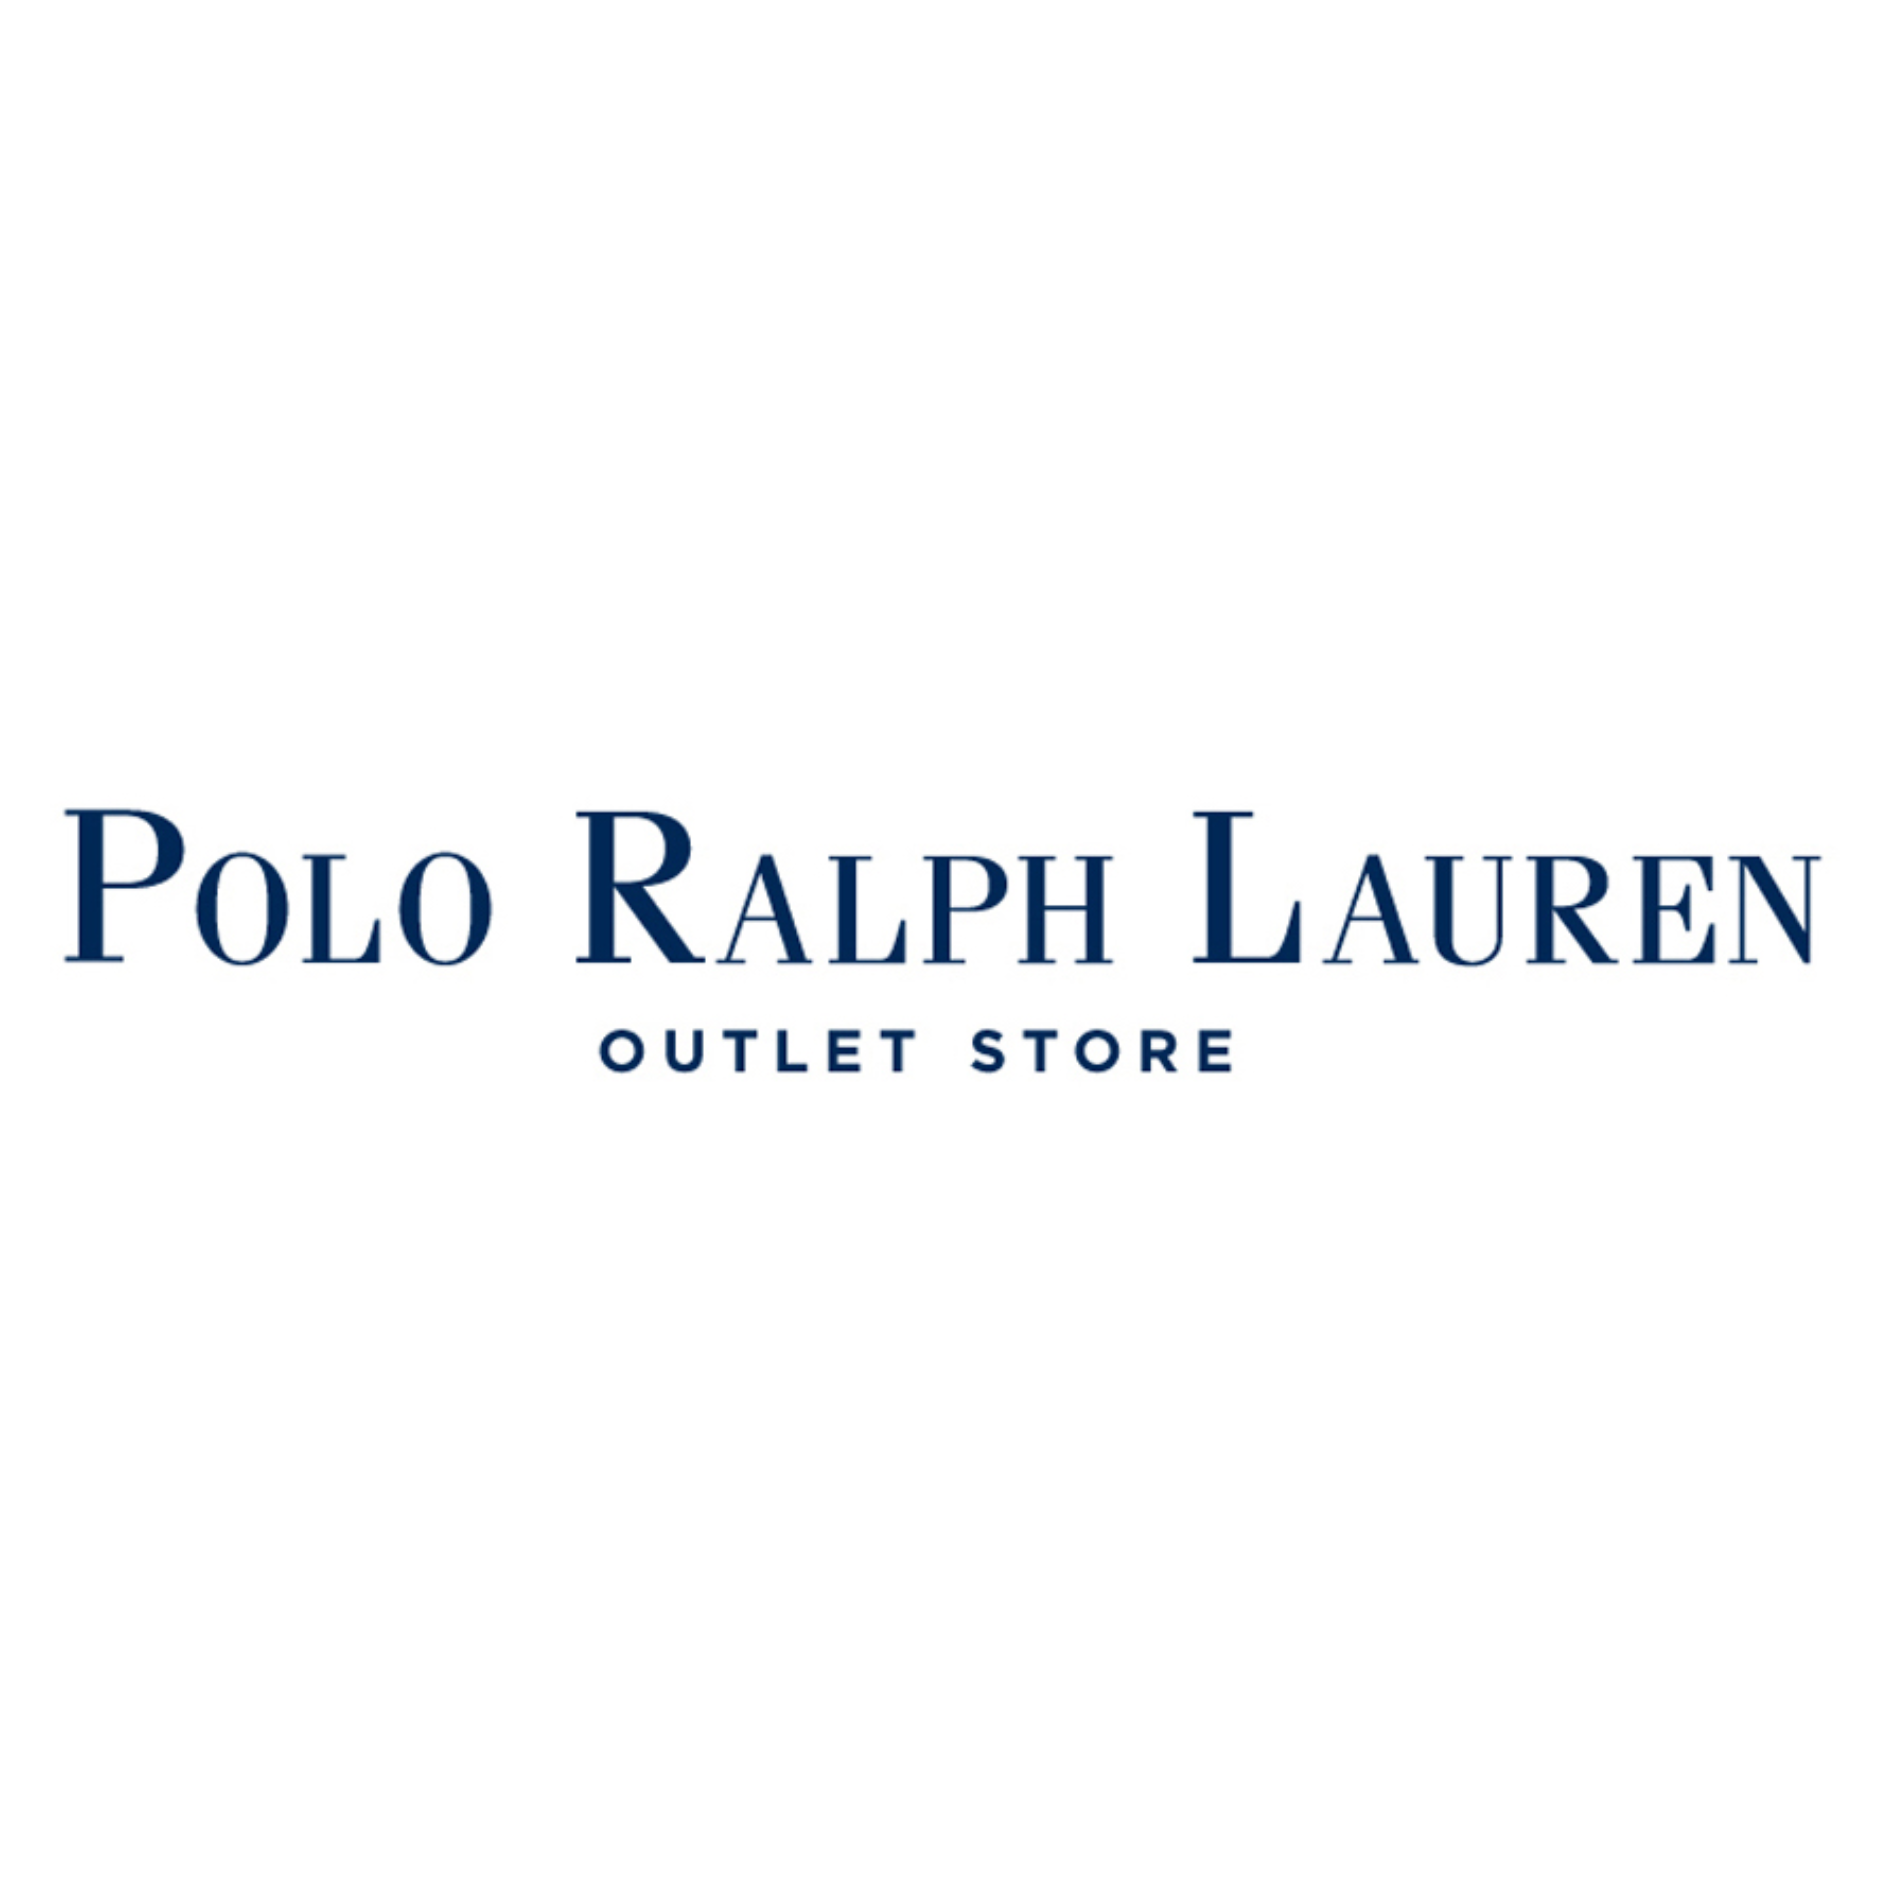 Polo Ralph Lauren Childrens Outlet Store Kildare